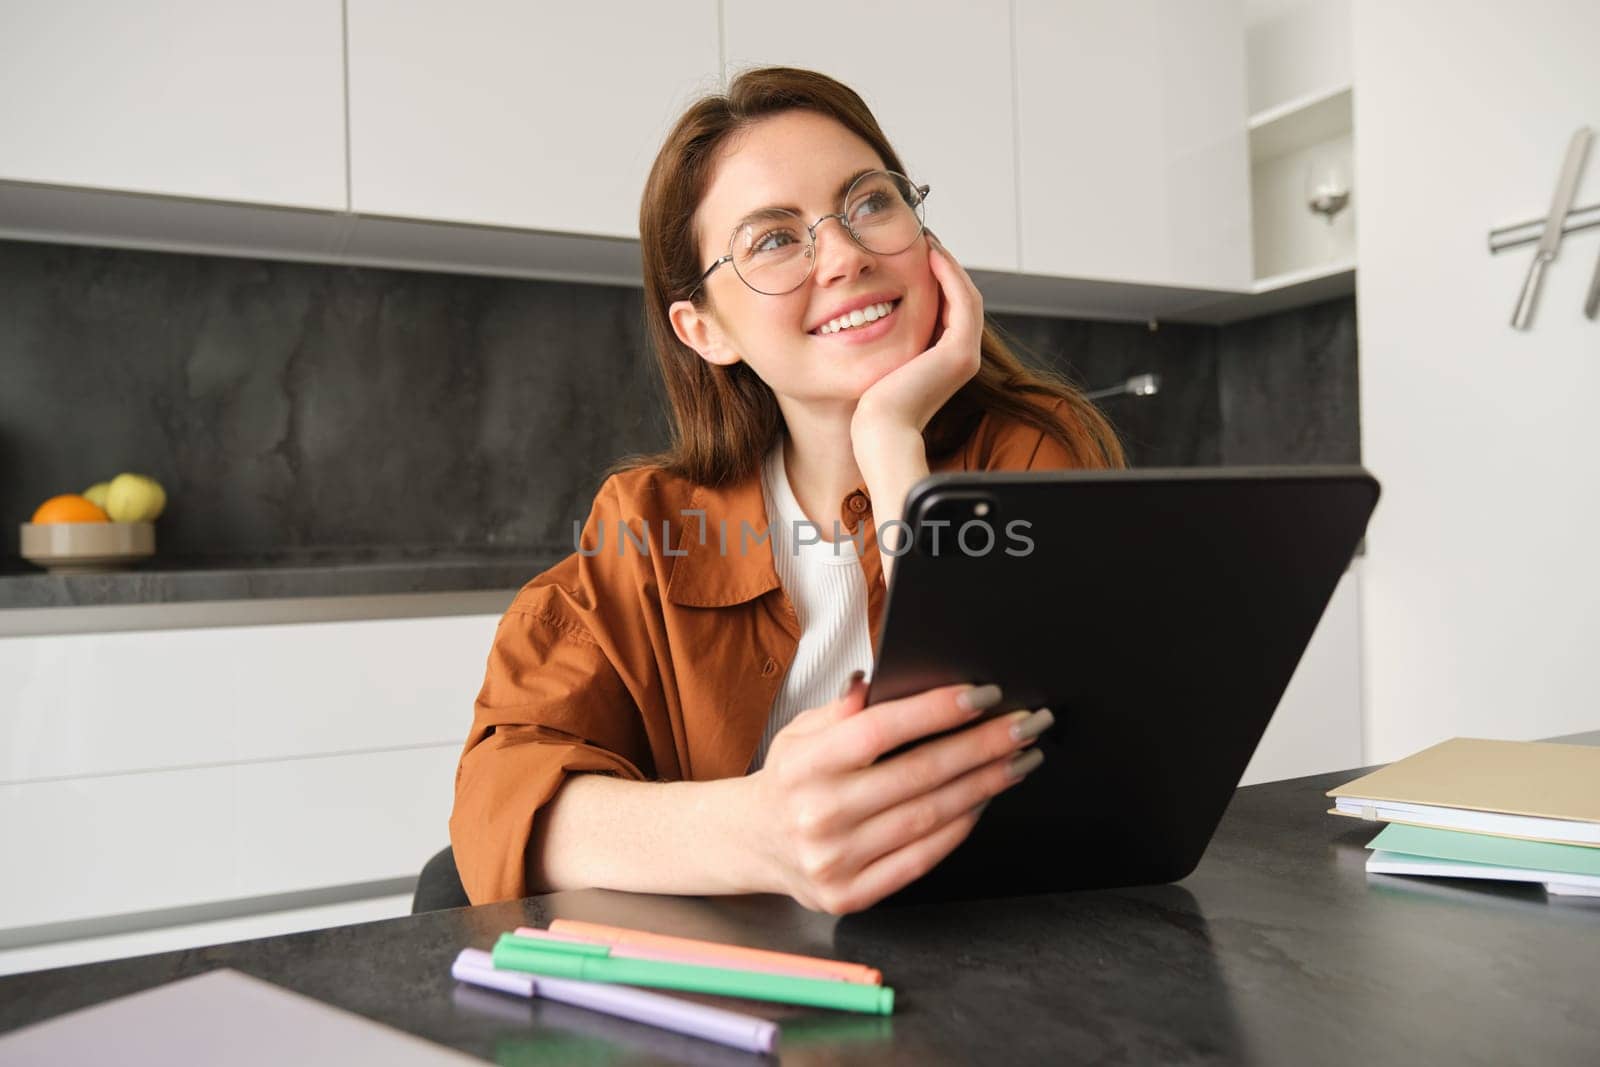 Portrait of young student, woman studying at home, working remotely, setup workplace in her kitchen, sitting on chair with digital tablet, reading in glasses.